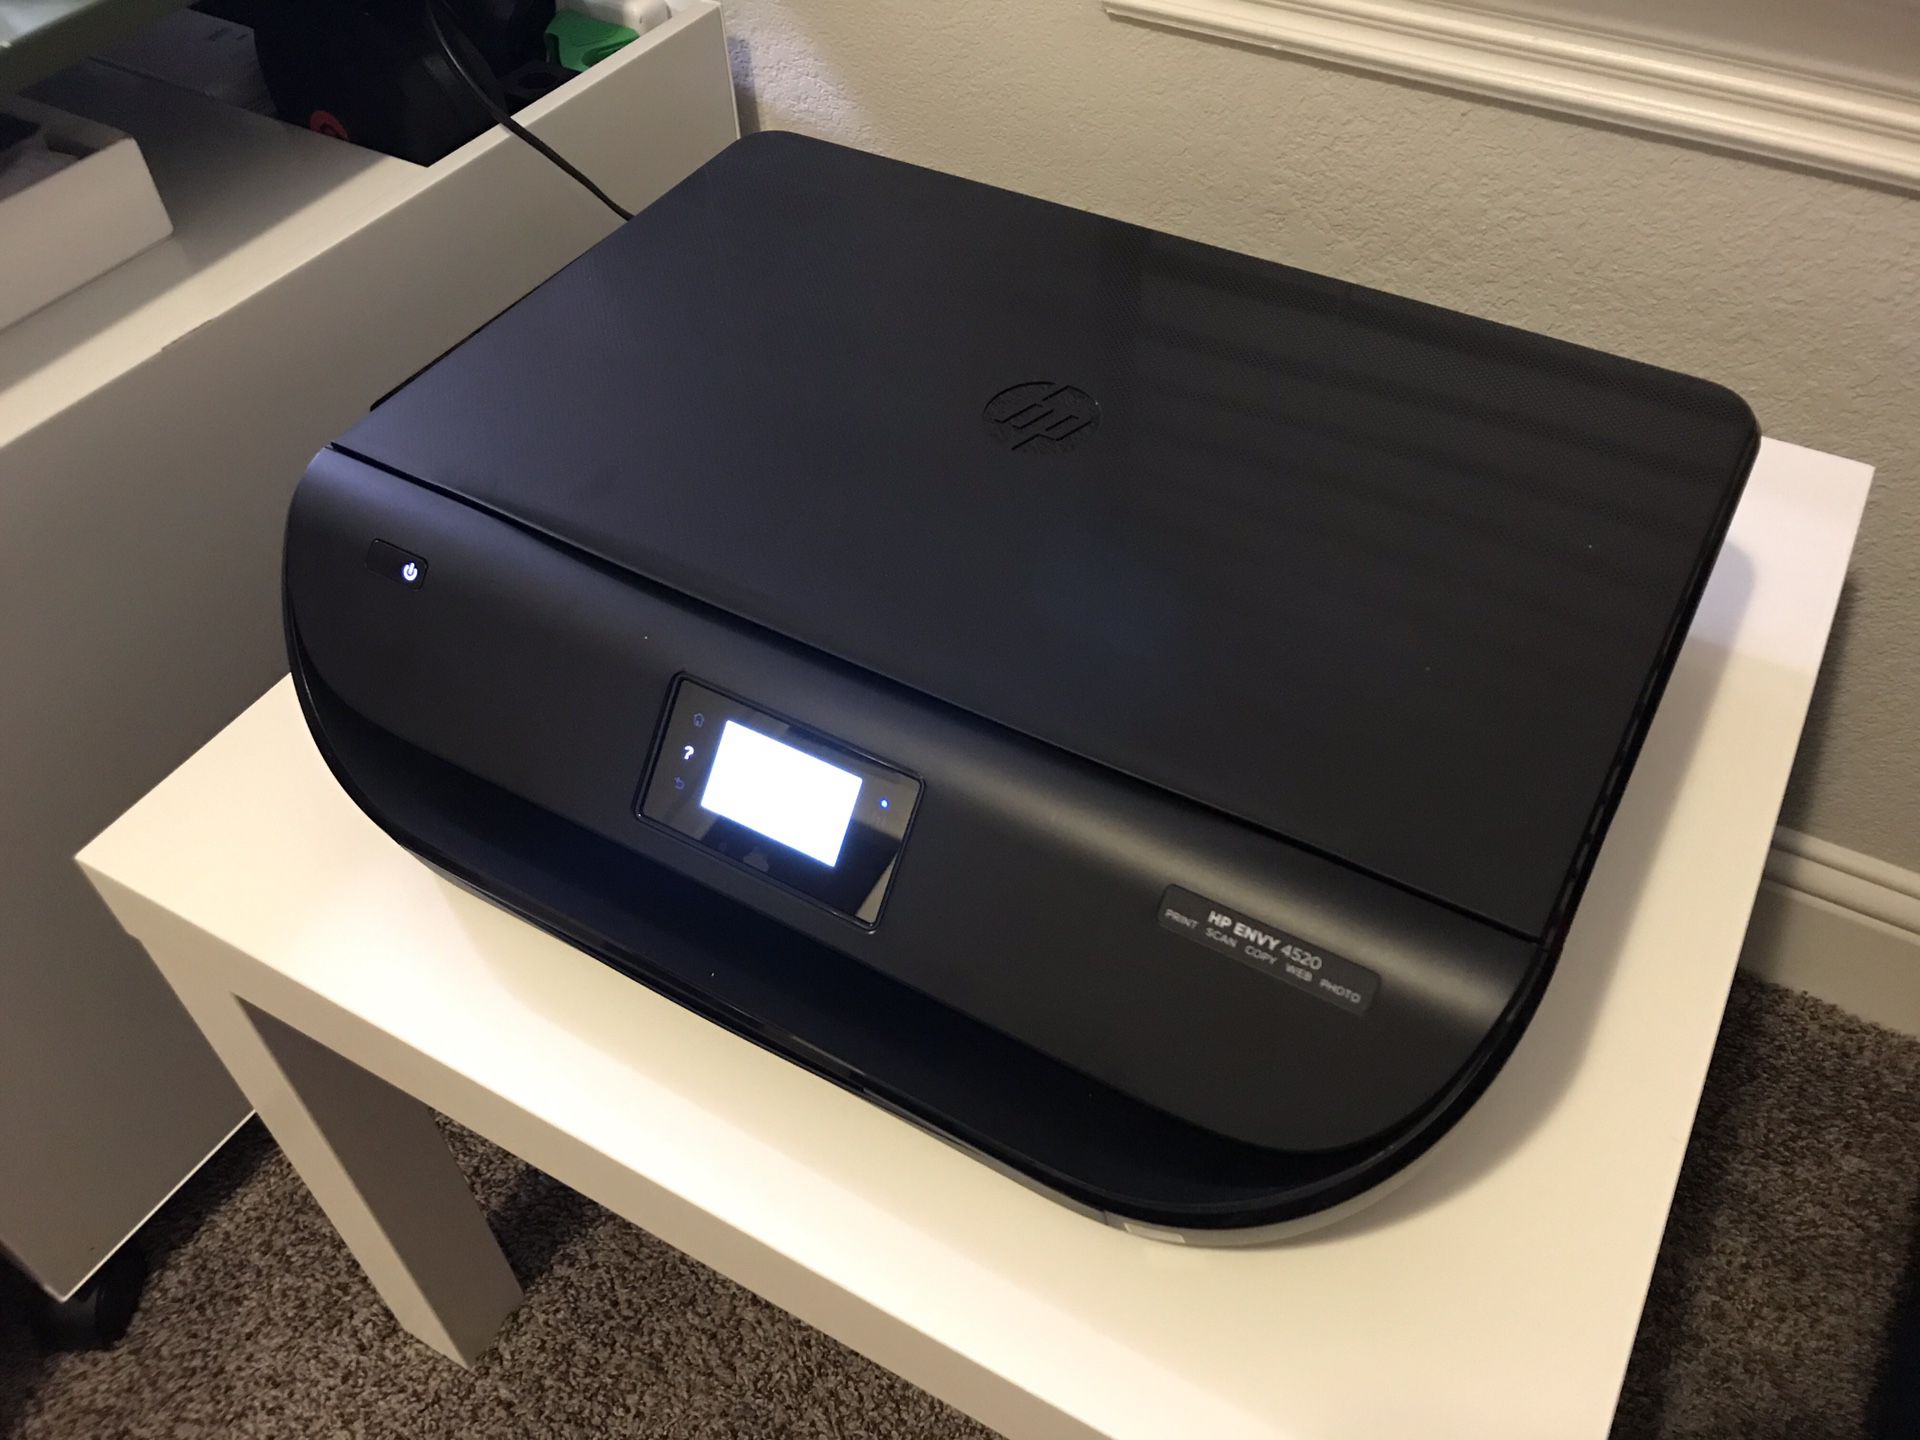 HP ENVY 4520 All-in-One Printer